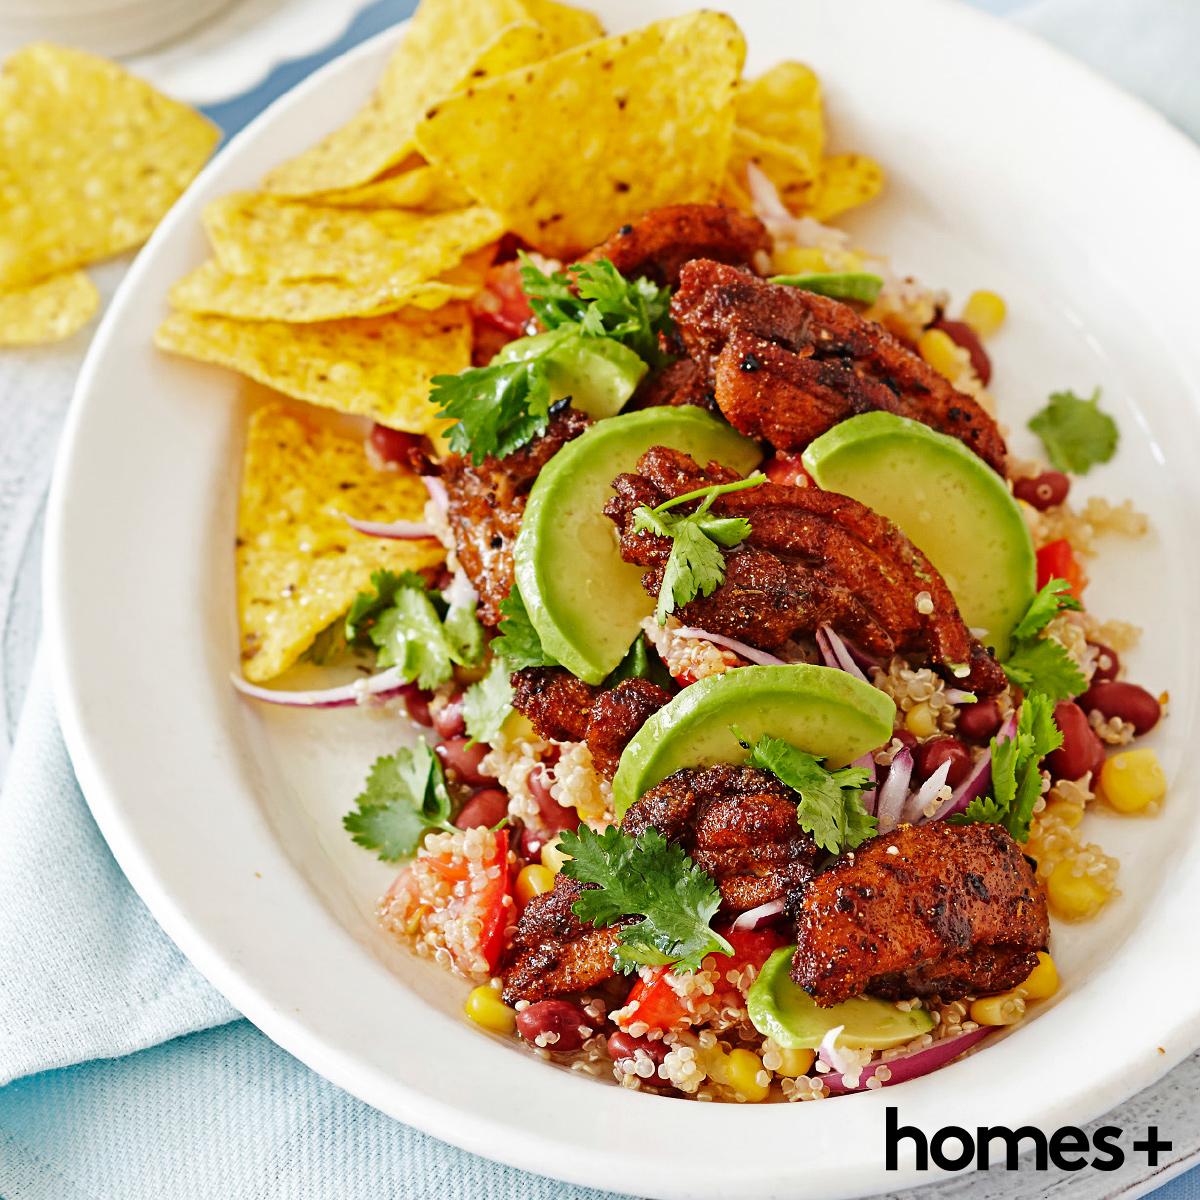 Feel like #Mexican? Sign up to our newsletter bit.ly/1KLWltV & get this #weekdaymeal in your inbox tomorrow!